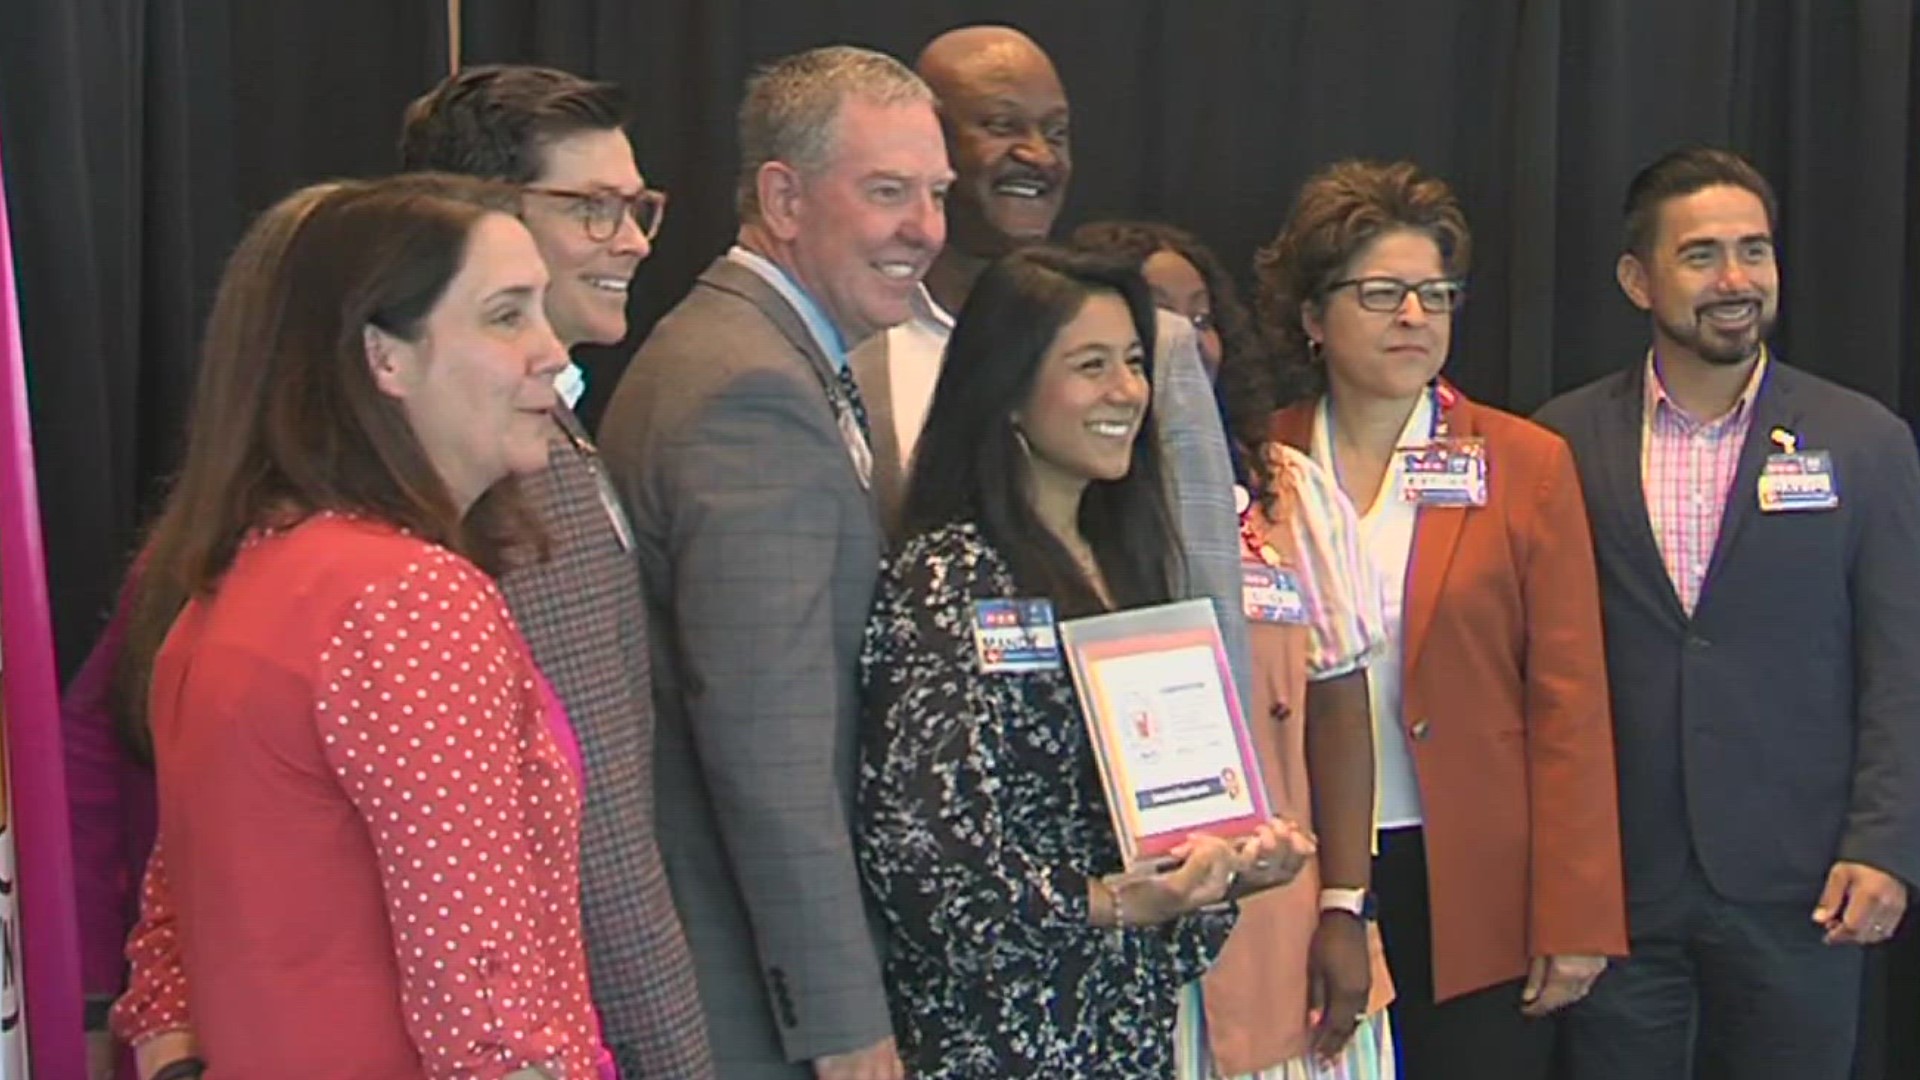 The Women of Distinction Awards hold a special place in the company's heart -- as the Texas store was started by a woman.